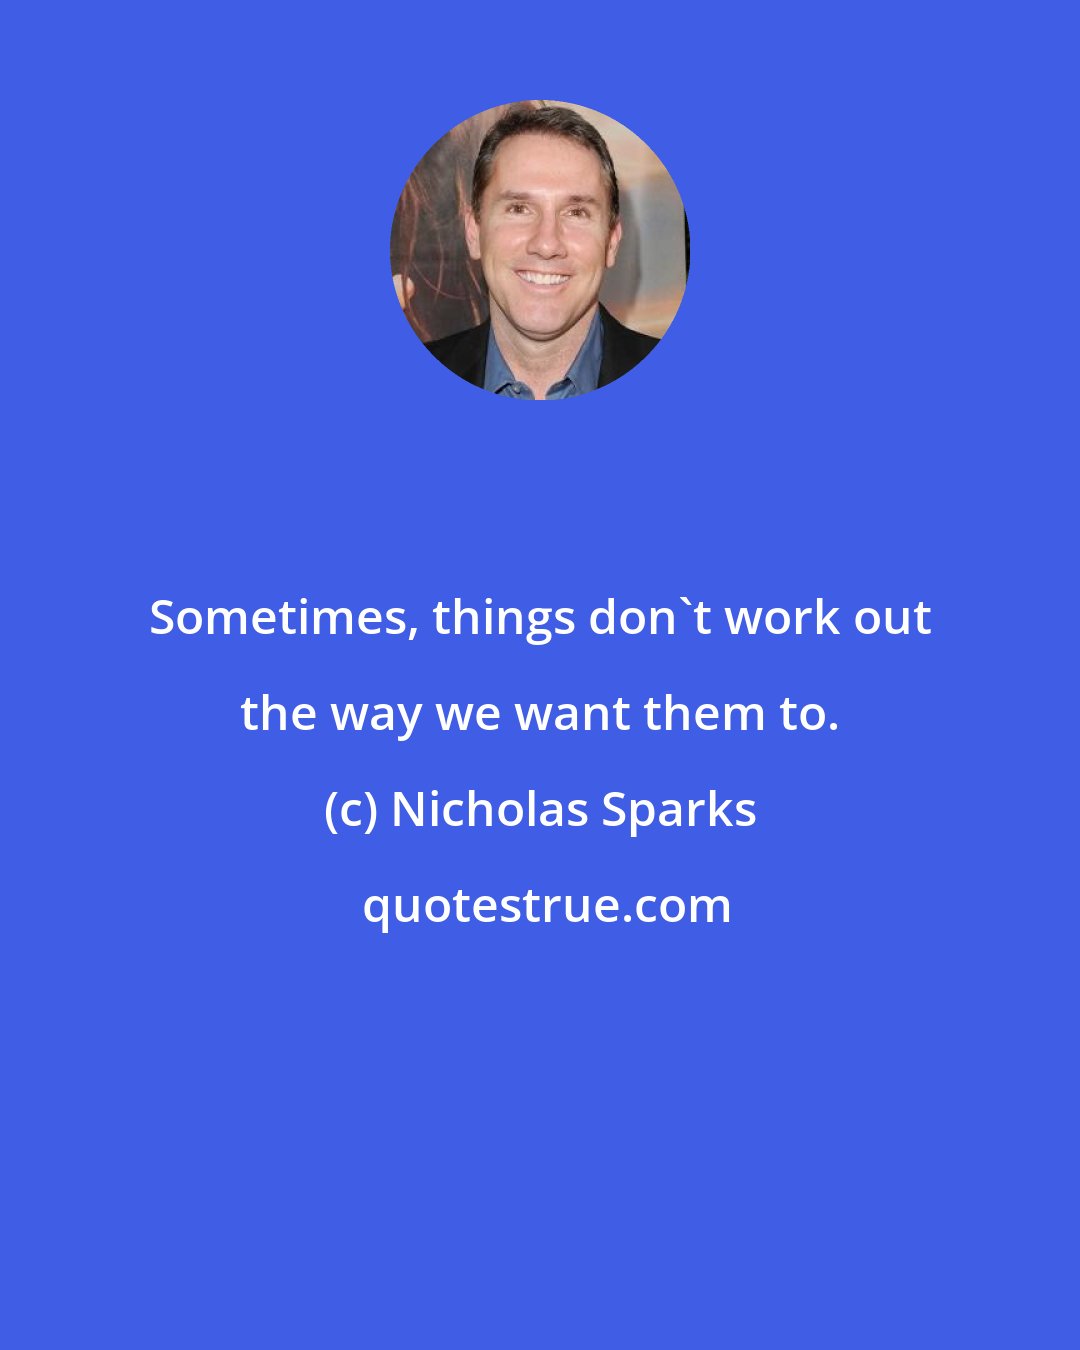 Nicholas Sparks: Sometimes, things don't work out the way we want them to.